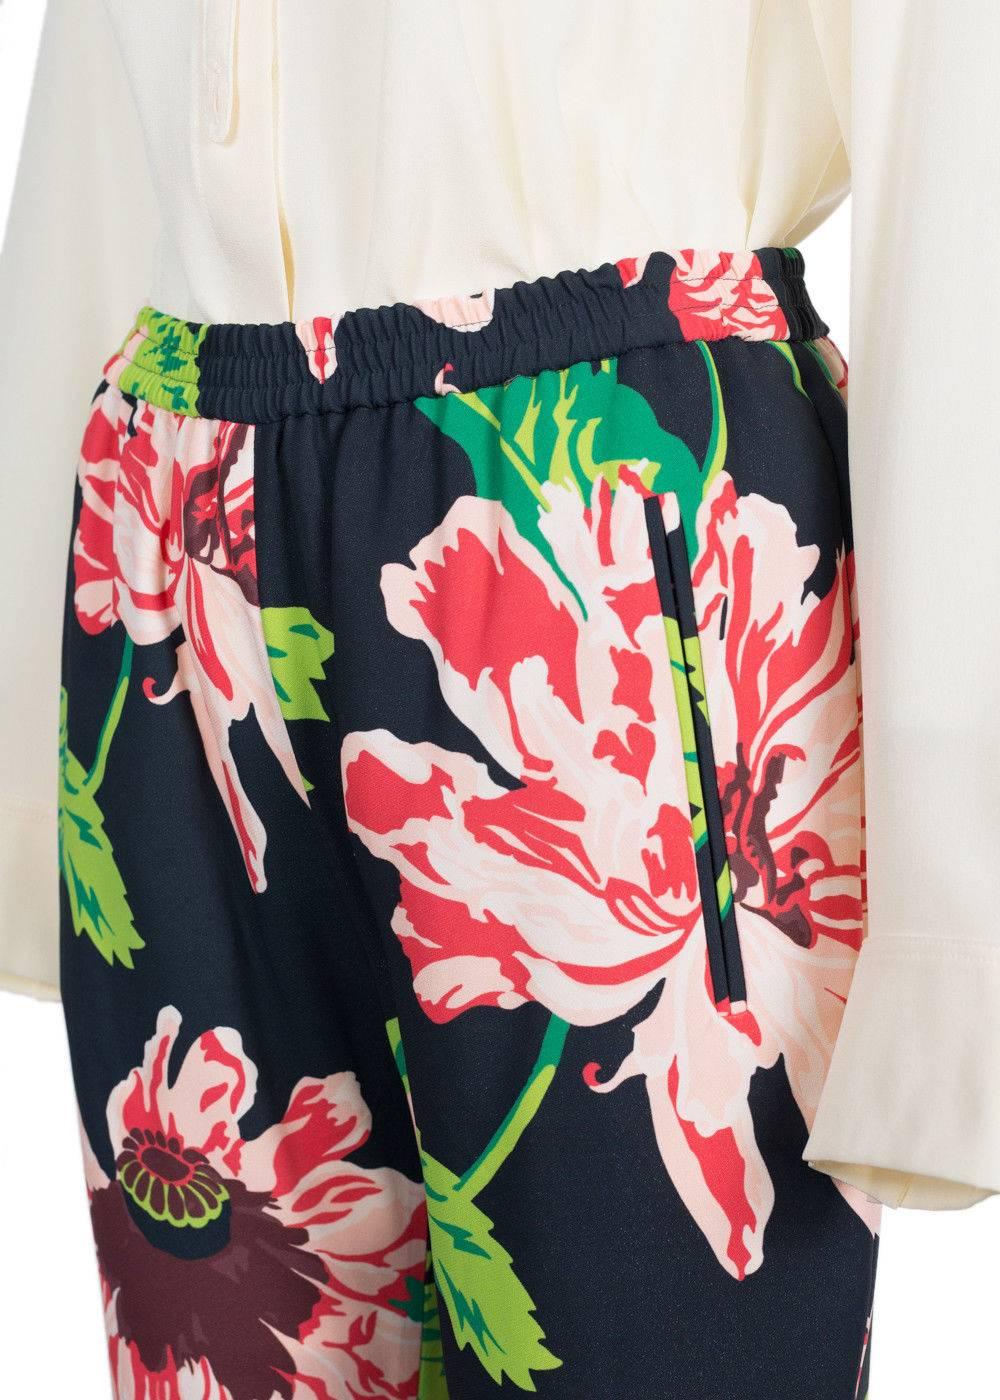 Brand New Stella McCartney Floral Print Trousers
Original Tag & Velvet Hanger Included
Retails in Stores & Online for $765
Size EUR 40 / US 6 Fits True to Size

Start your day off in your Stella McCartney Floral Print Trousers. These easy flowing